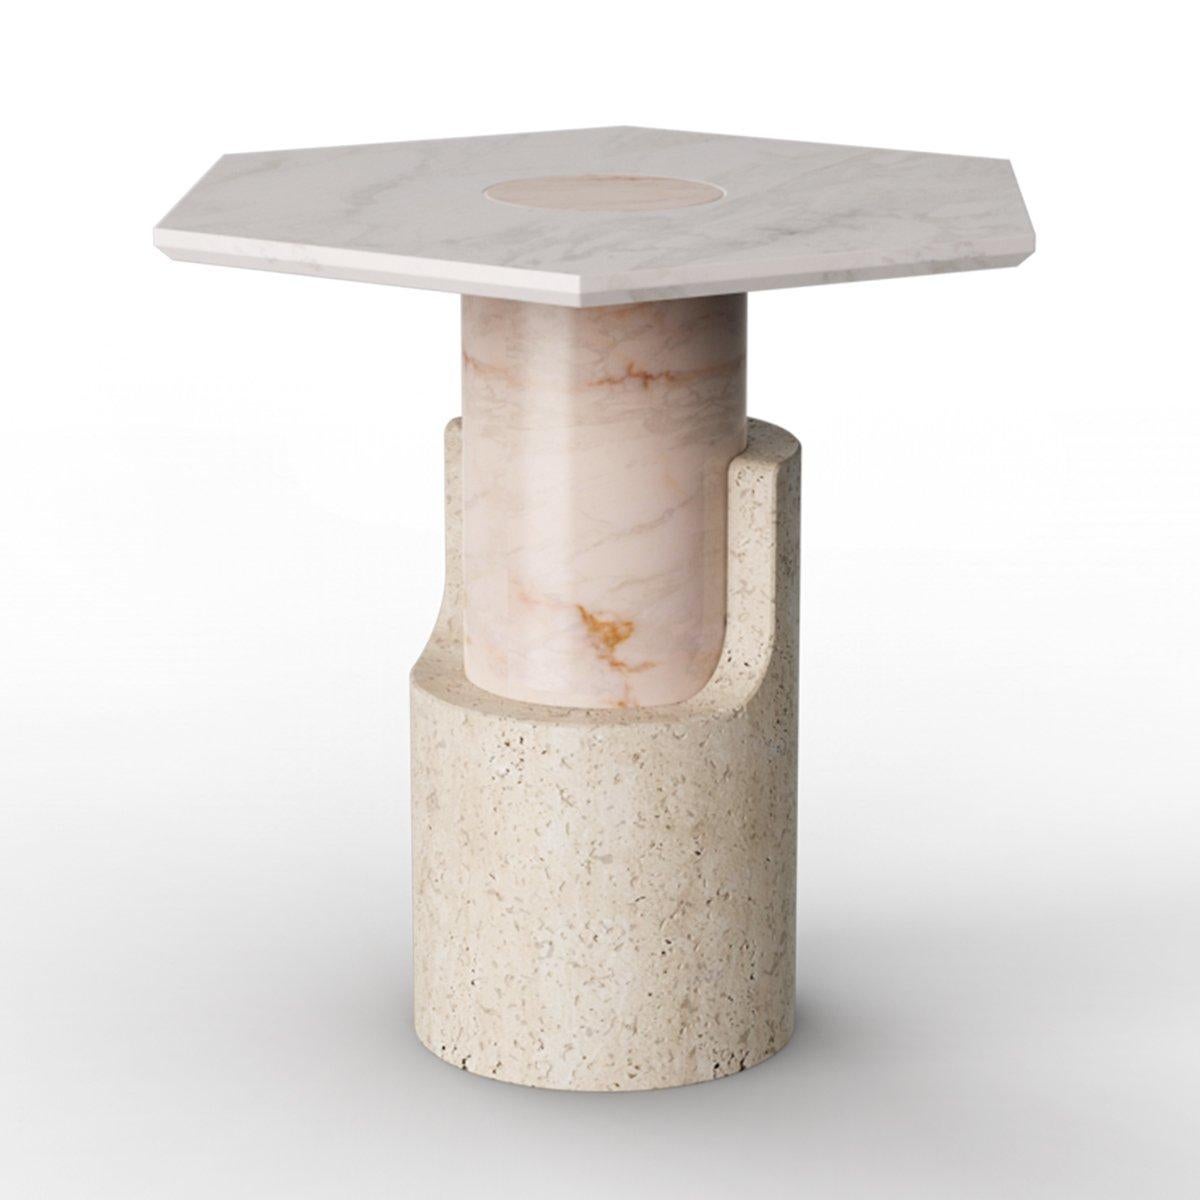 Sculpted contemporary marble side table by Dooq

Dimensions:
W 60 x D 60 x H 55 cm

Materials and finishes
Entirely handmade in marble

Product
The Braque side table is an elegant and slick side table created by Dooq. Braque is entirely